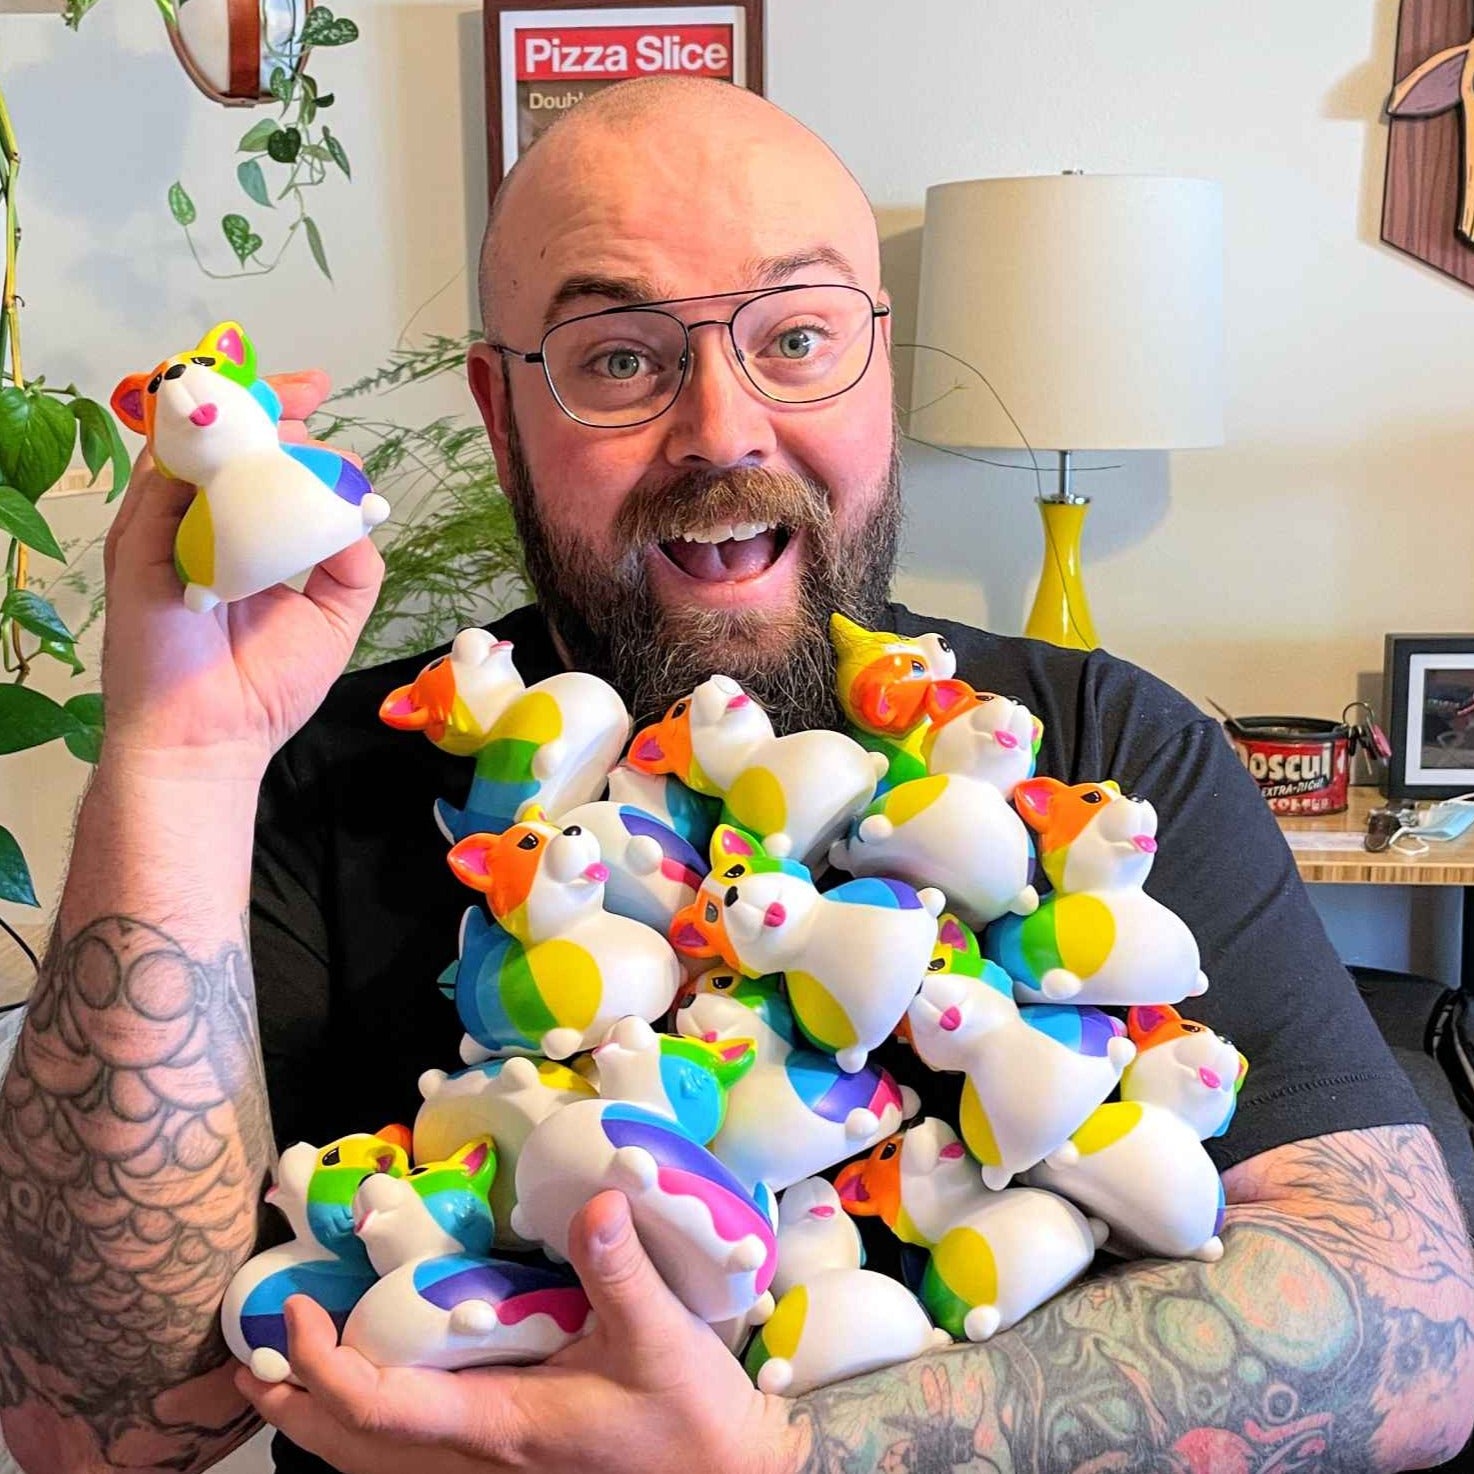 Jason holding an armload of corgi ducks and looking very excited about it